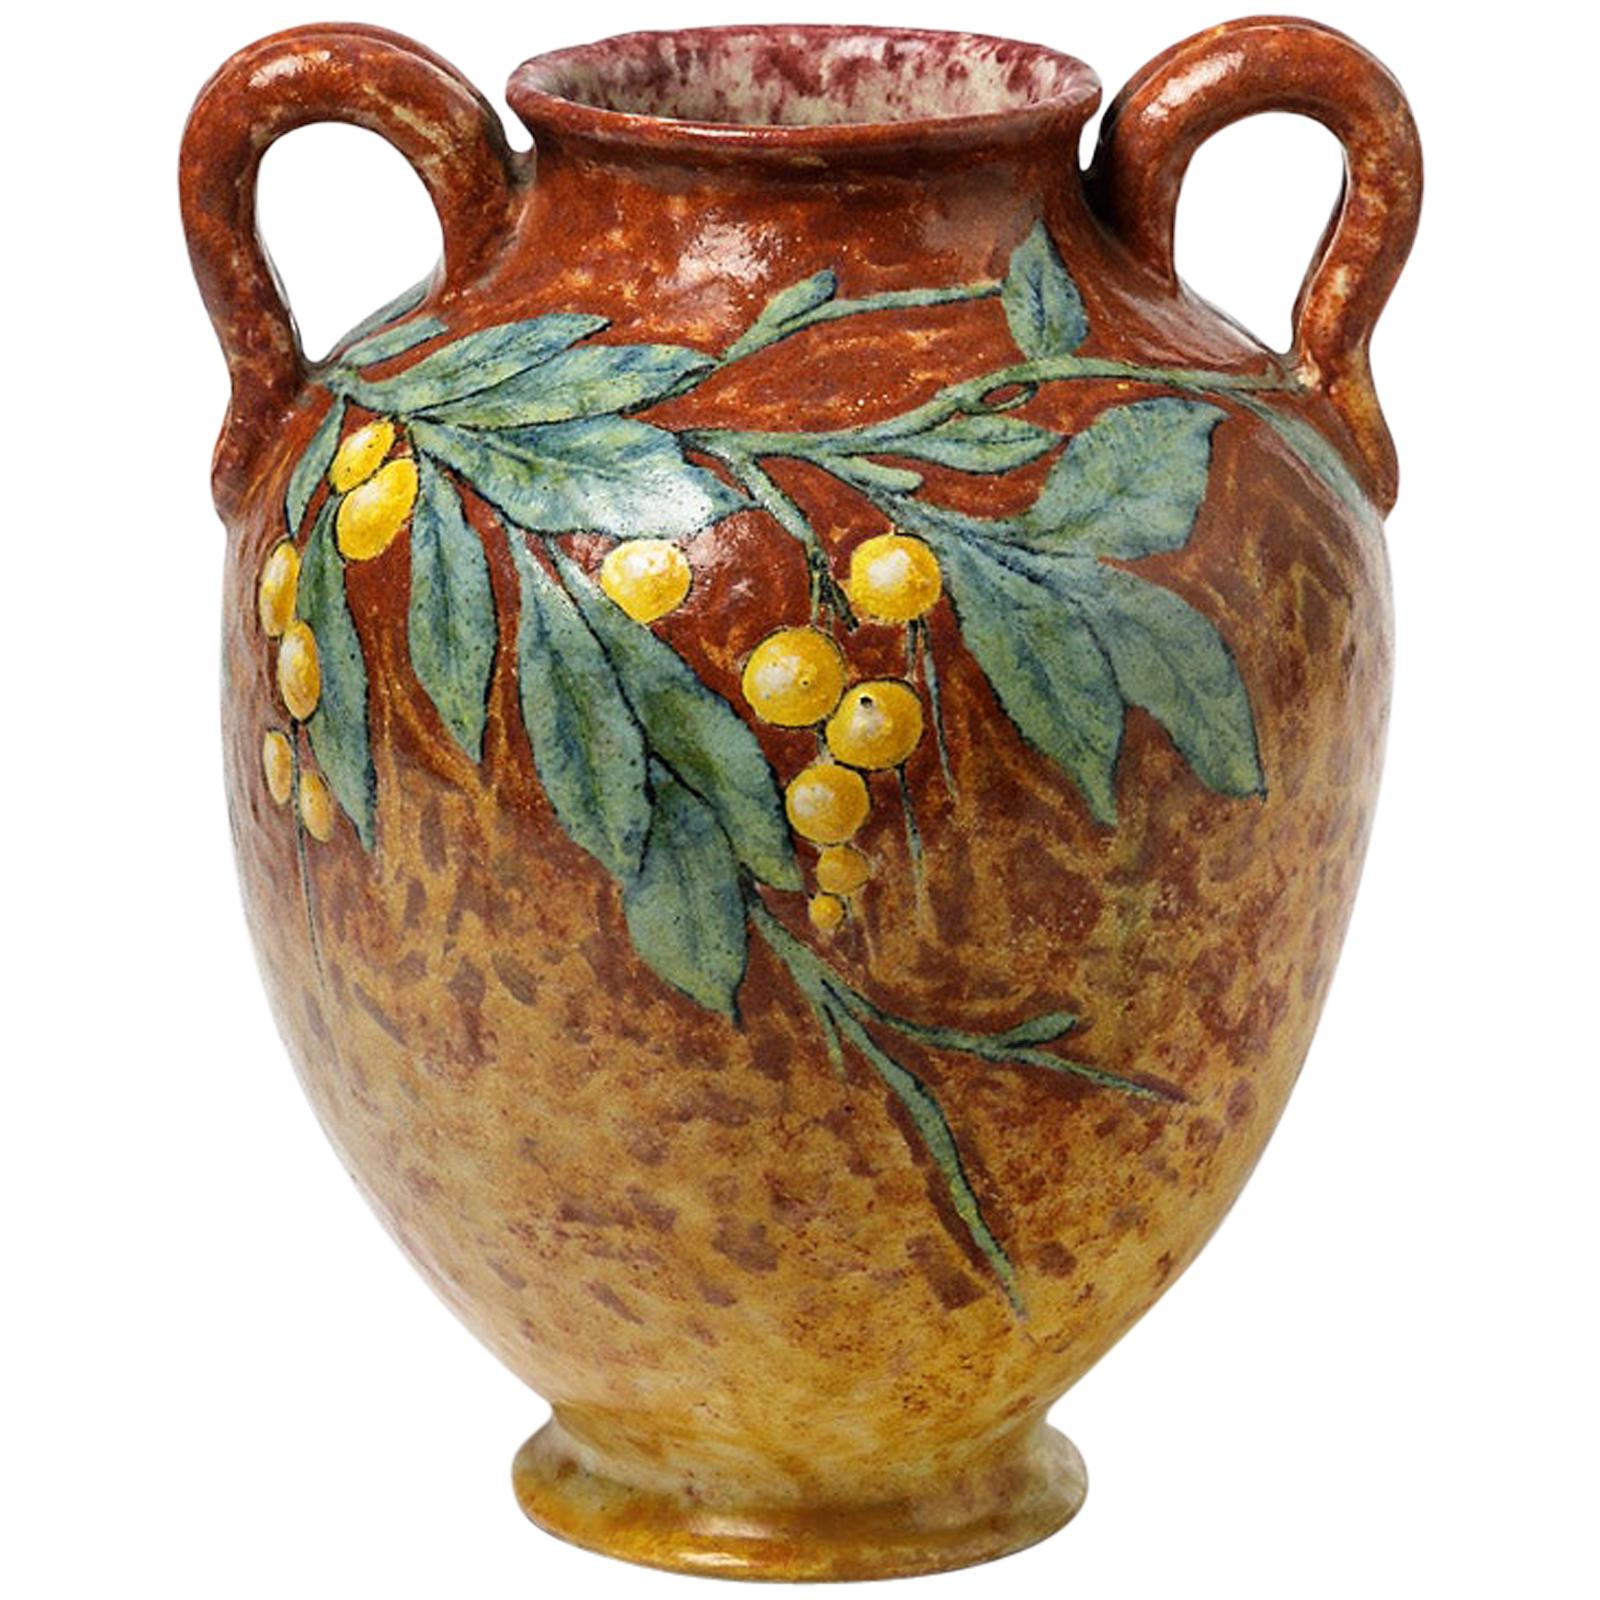 Decorative Classic Stoneware Ceramic Vase by Chaumeil 1912 Orange and Flower For Sale